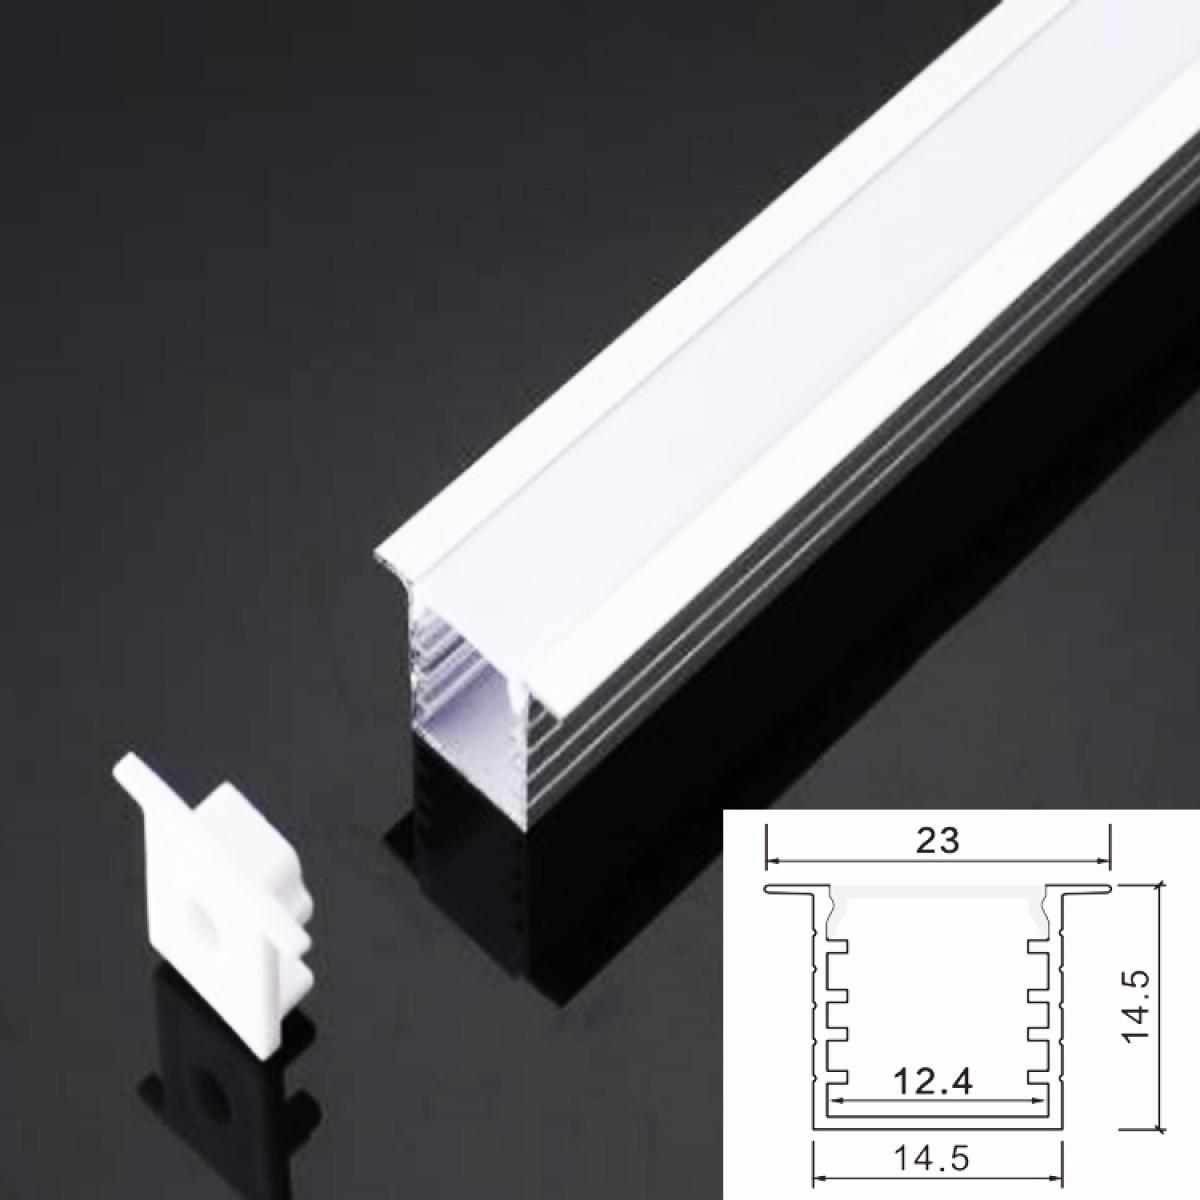 TXN-014A LX23X14.5MM Shenzhen Led Light Aluminum Profile Or Products For Desk Hutch Lighting